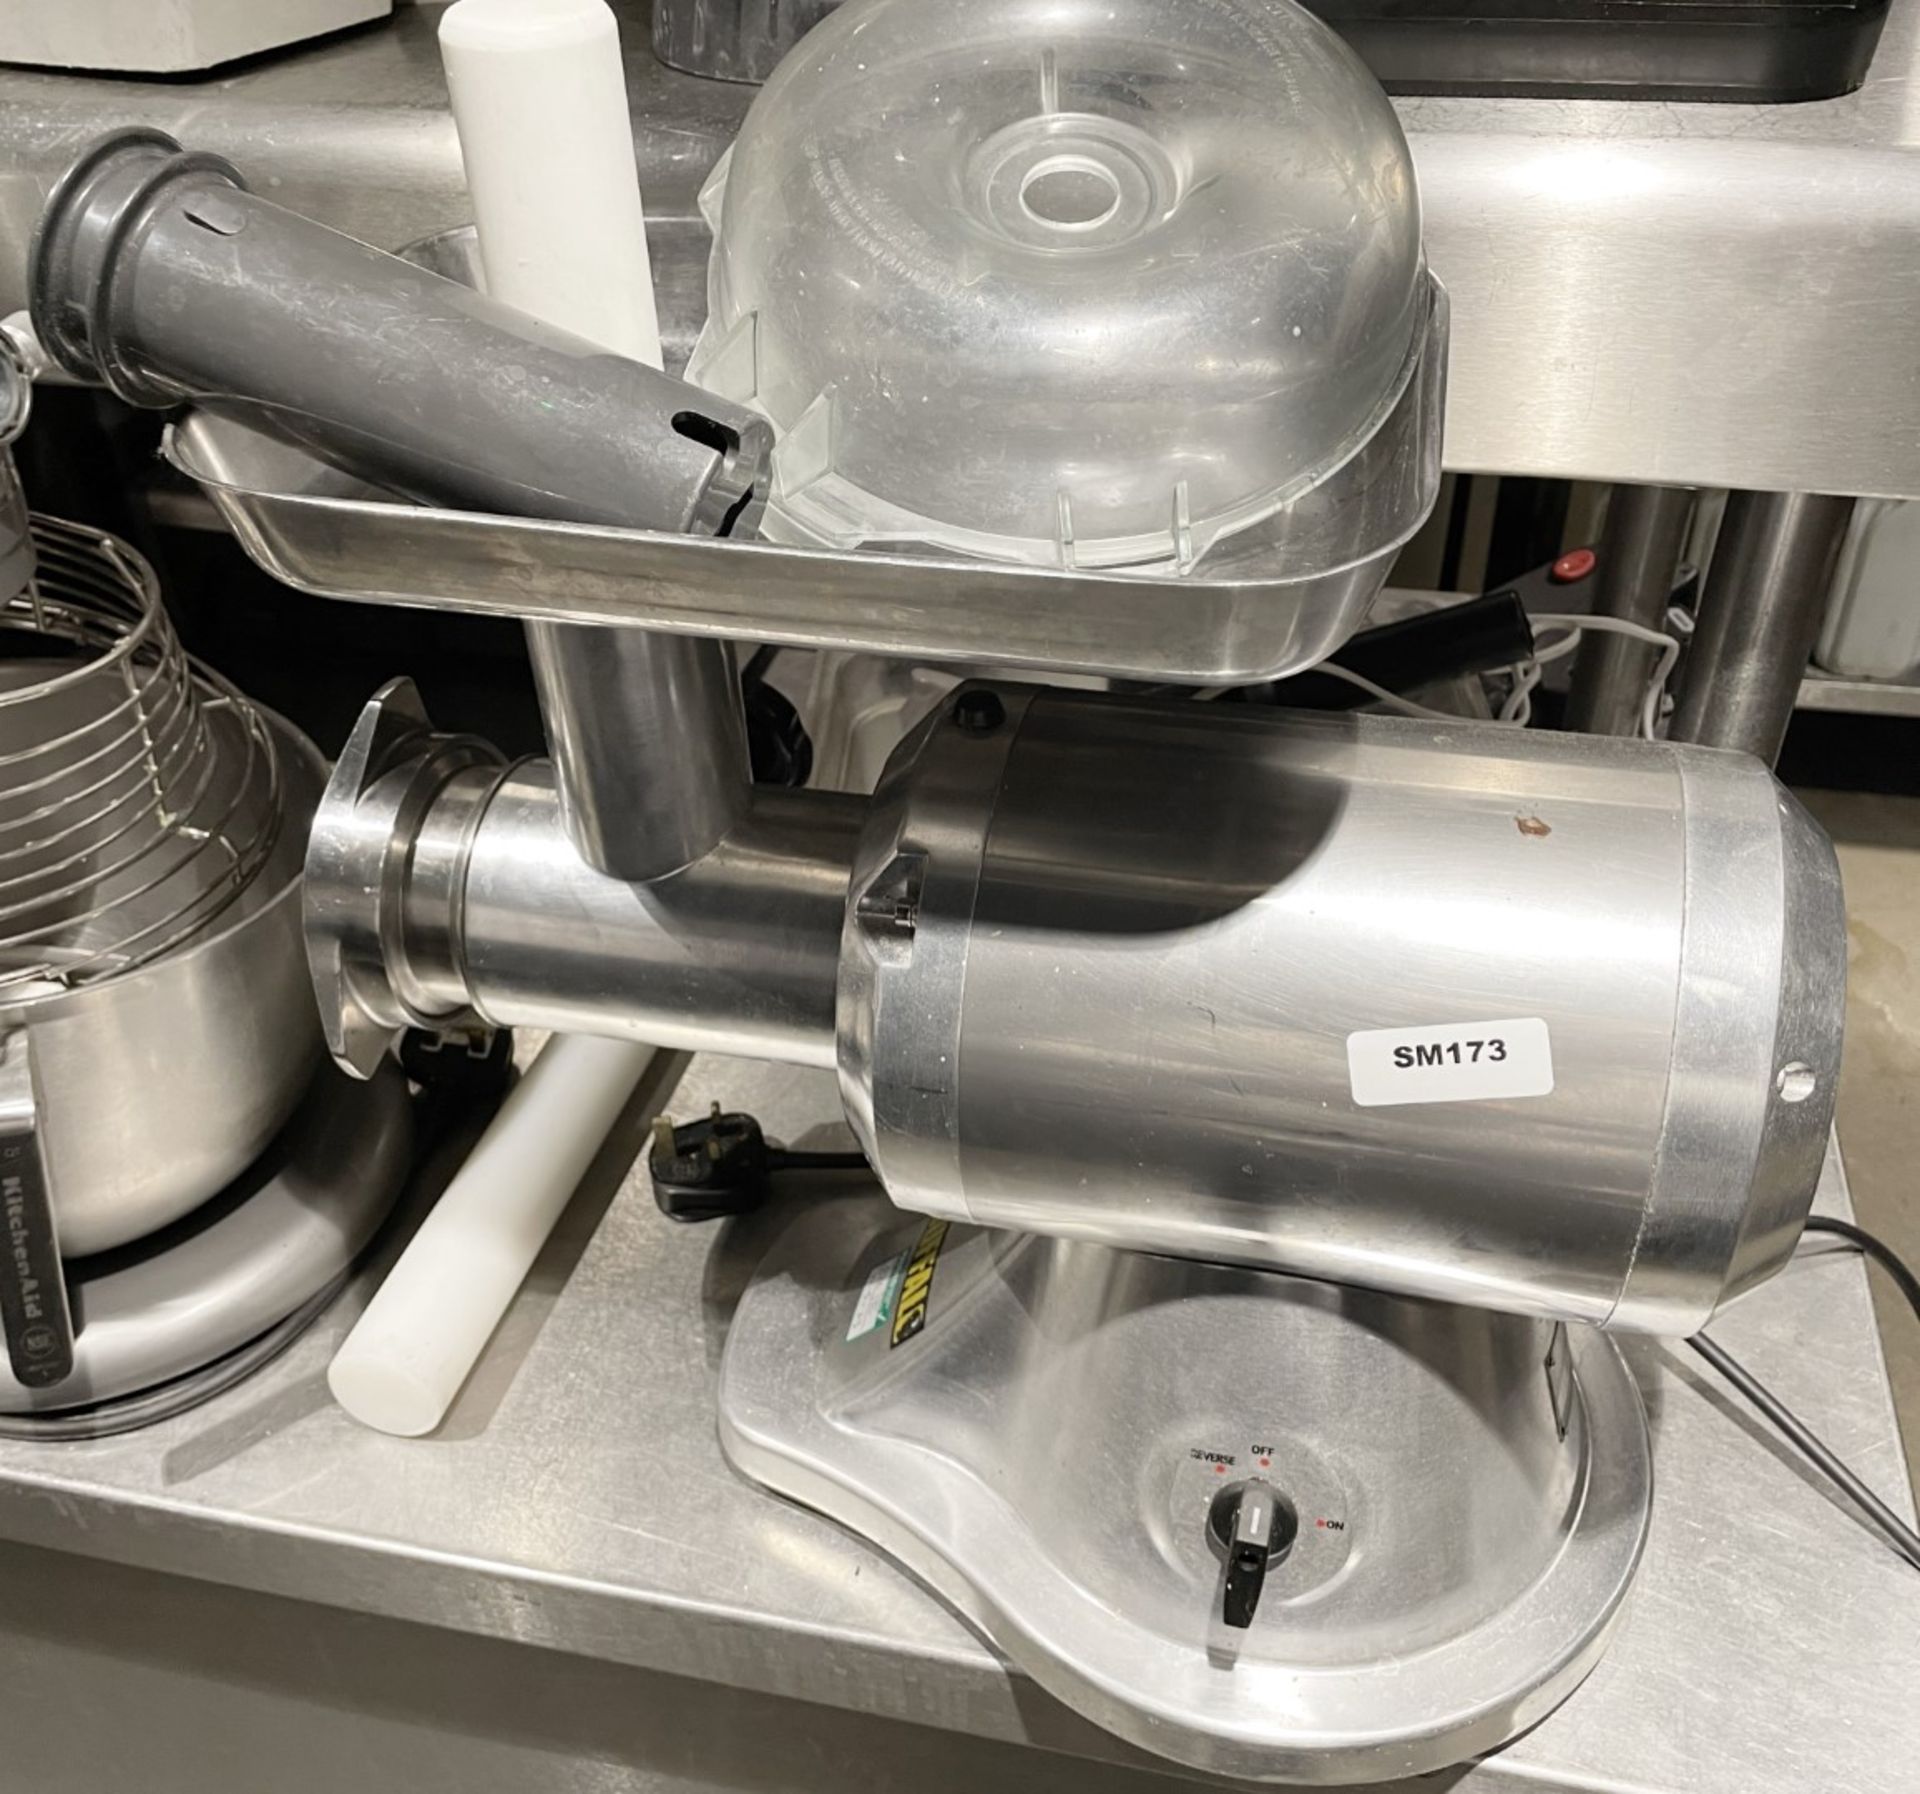 1 x Buffalo CD400 Heavy Duty Meat Mincer Commercial Mincer with Accessories - RRP £770 - Image 3 of 16